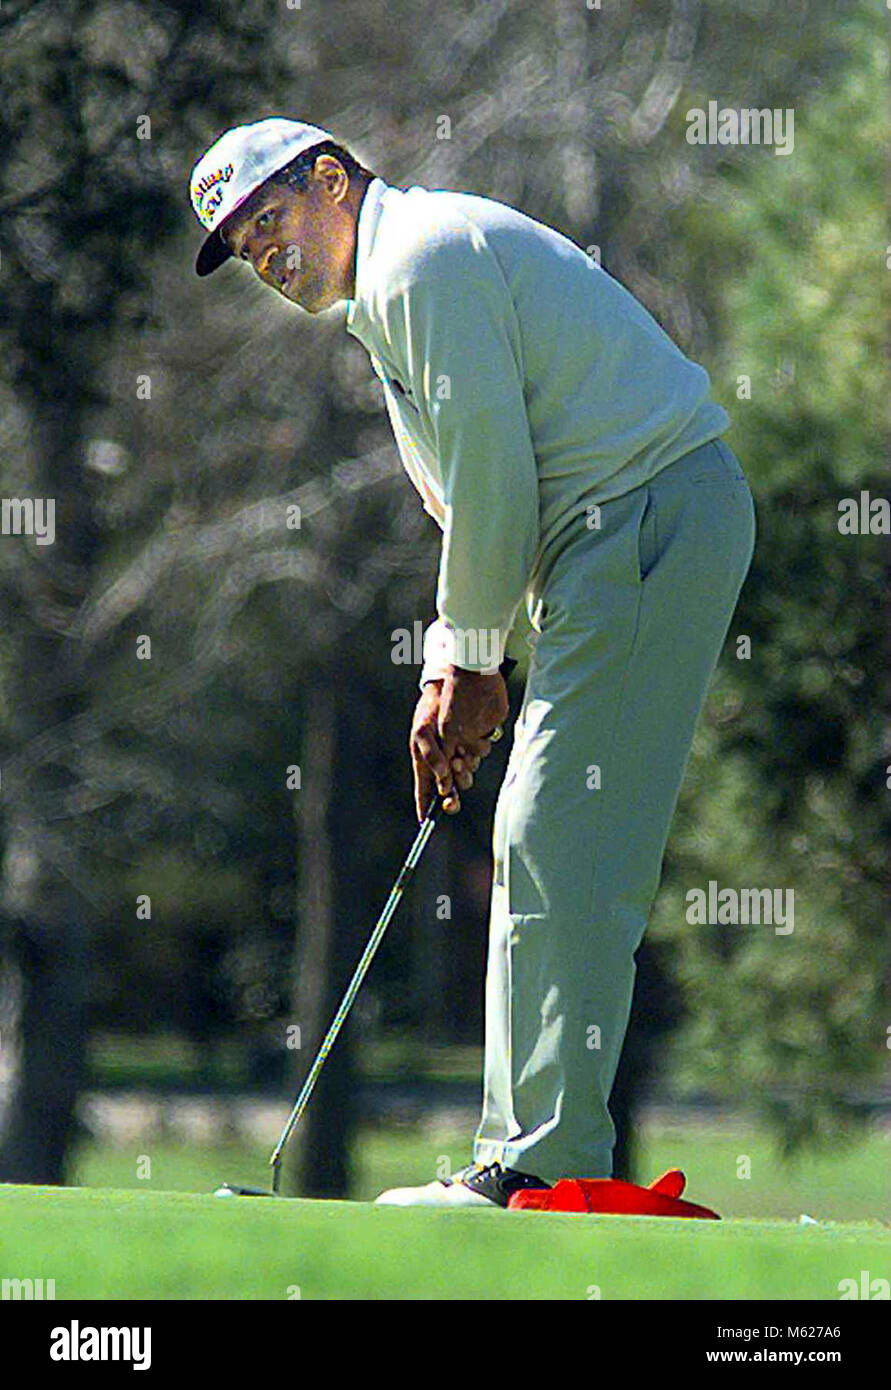 O.J. Simpson putts the ball during a round of golf at the Hansen Dam golf  course in Pacoima, CA on February 5, 1997 during the civil trial for the  death of Ron